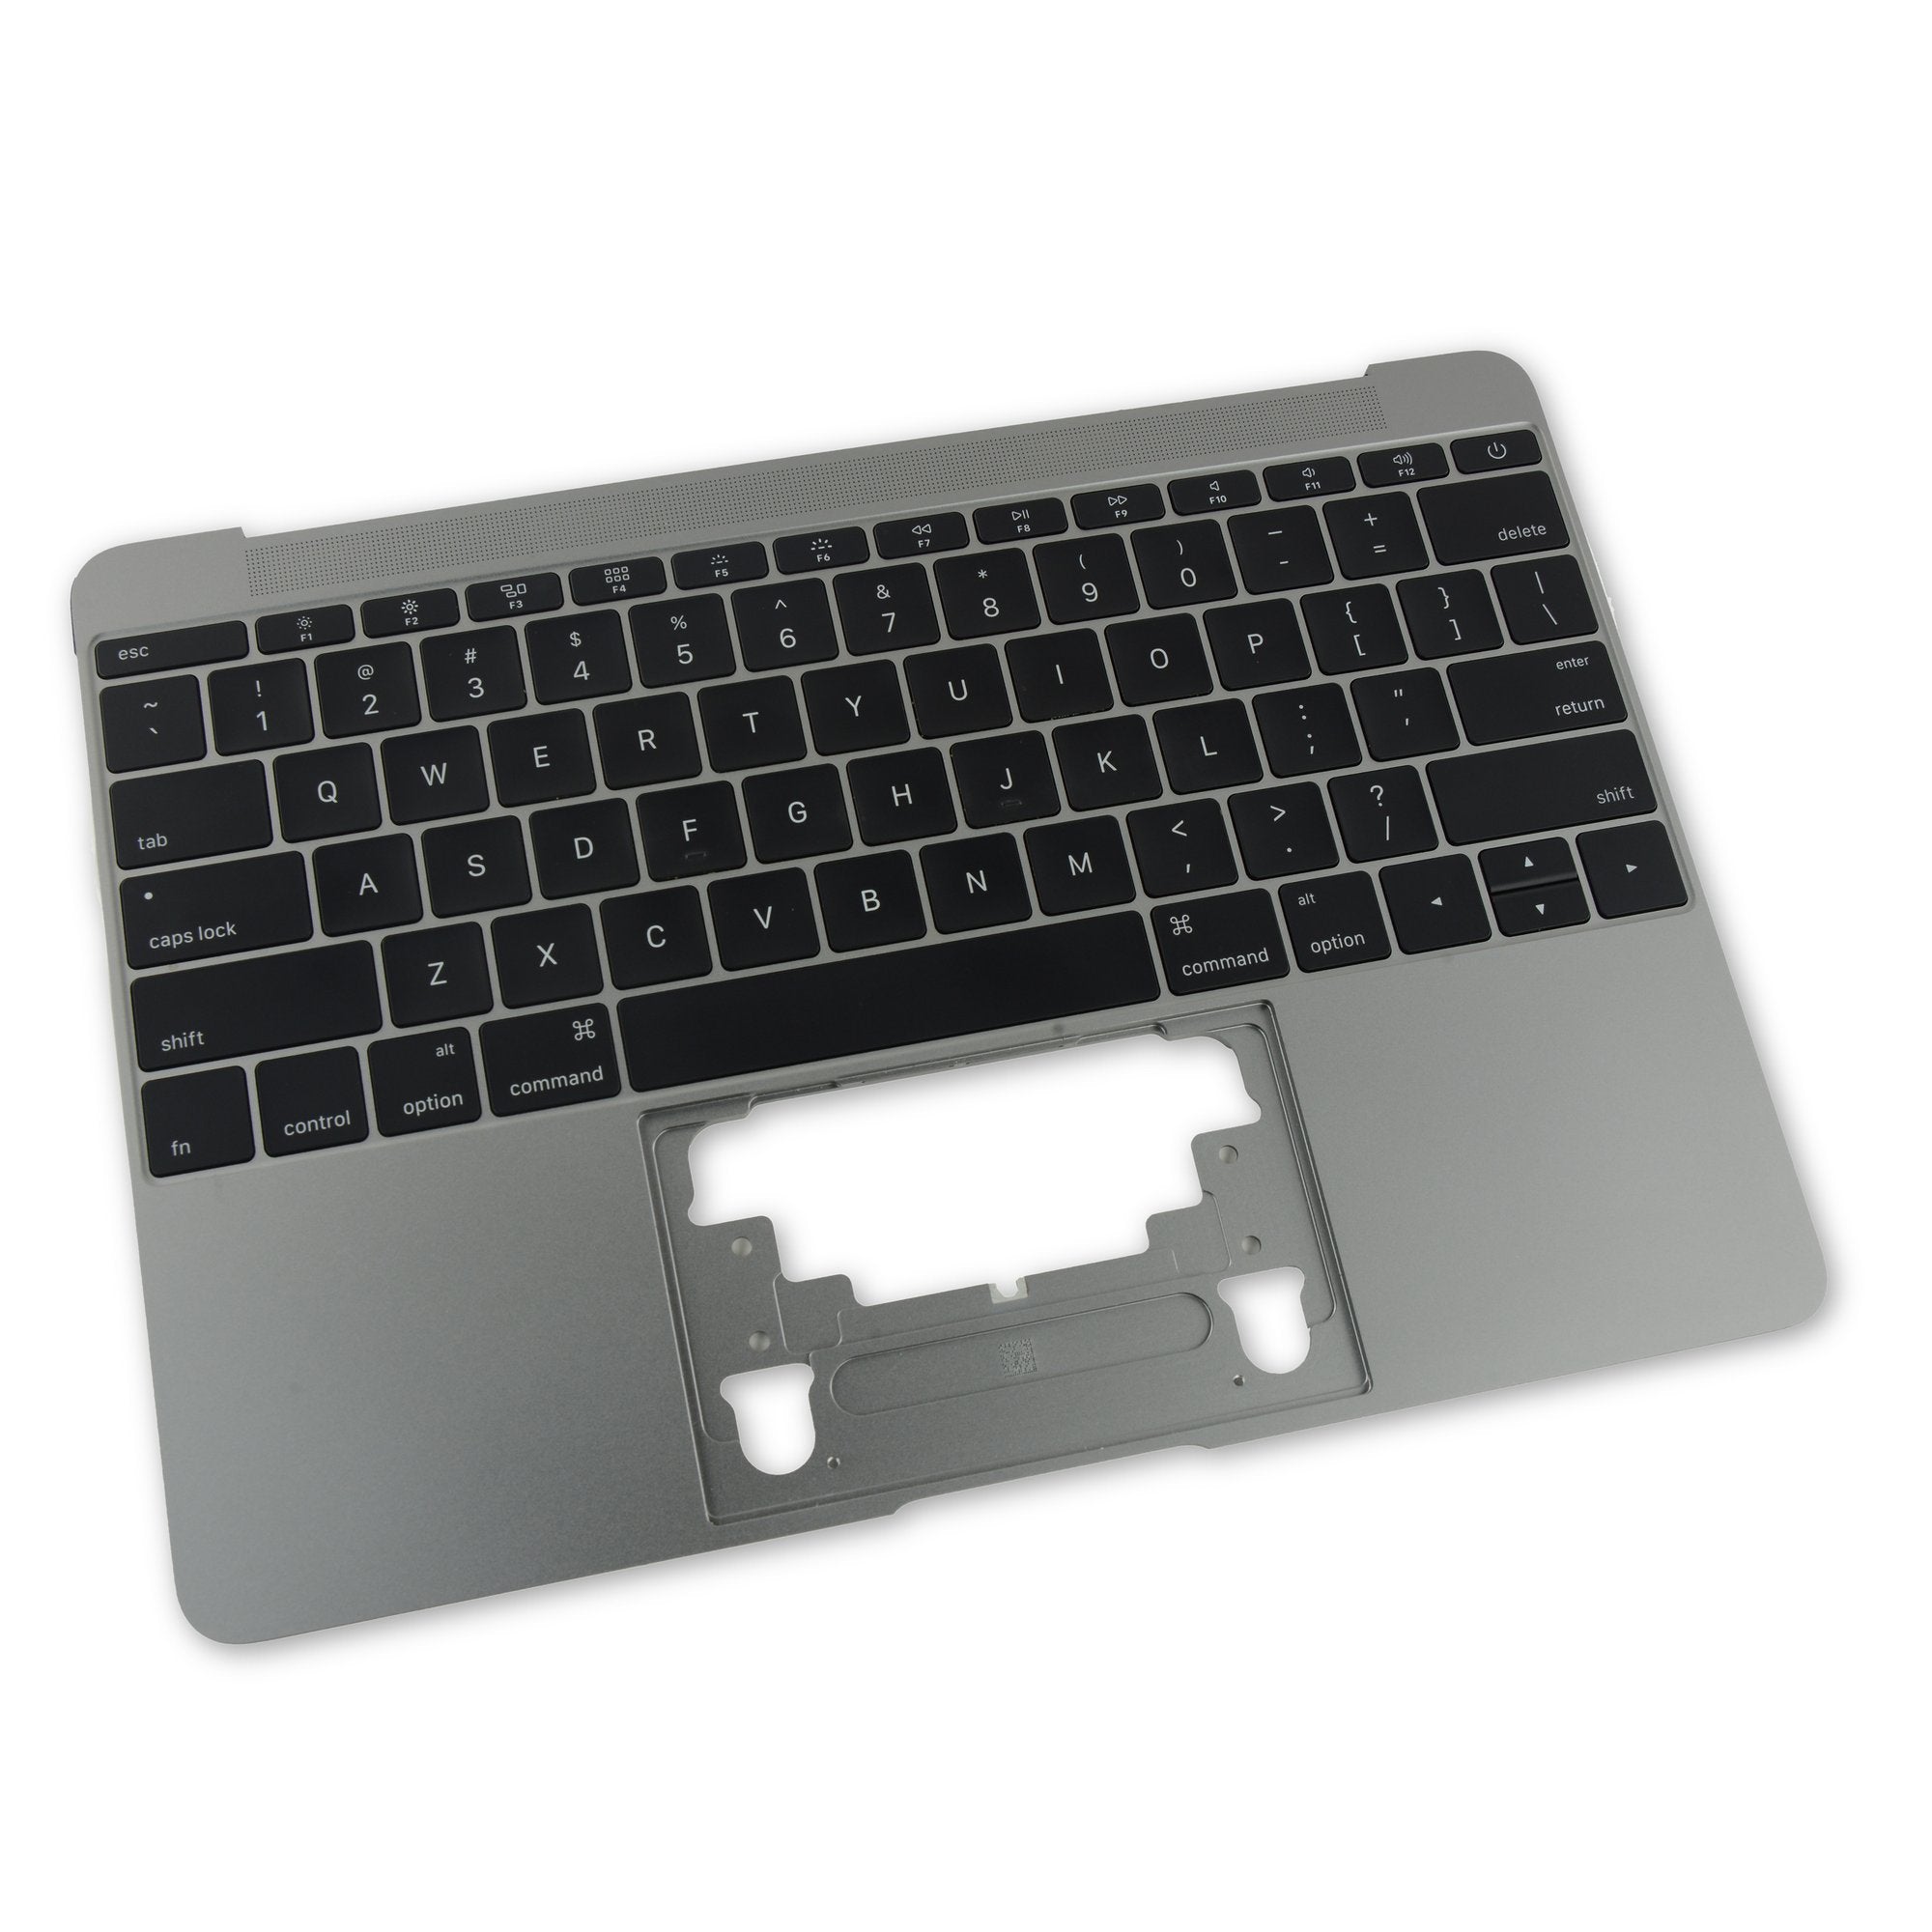 MacBook 12" Retina (Early 2015) Upper Case with Keyboard Dark Gray Used, A-Stock